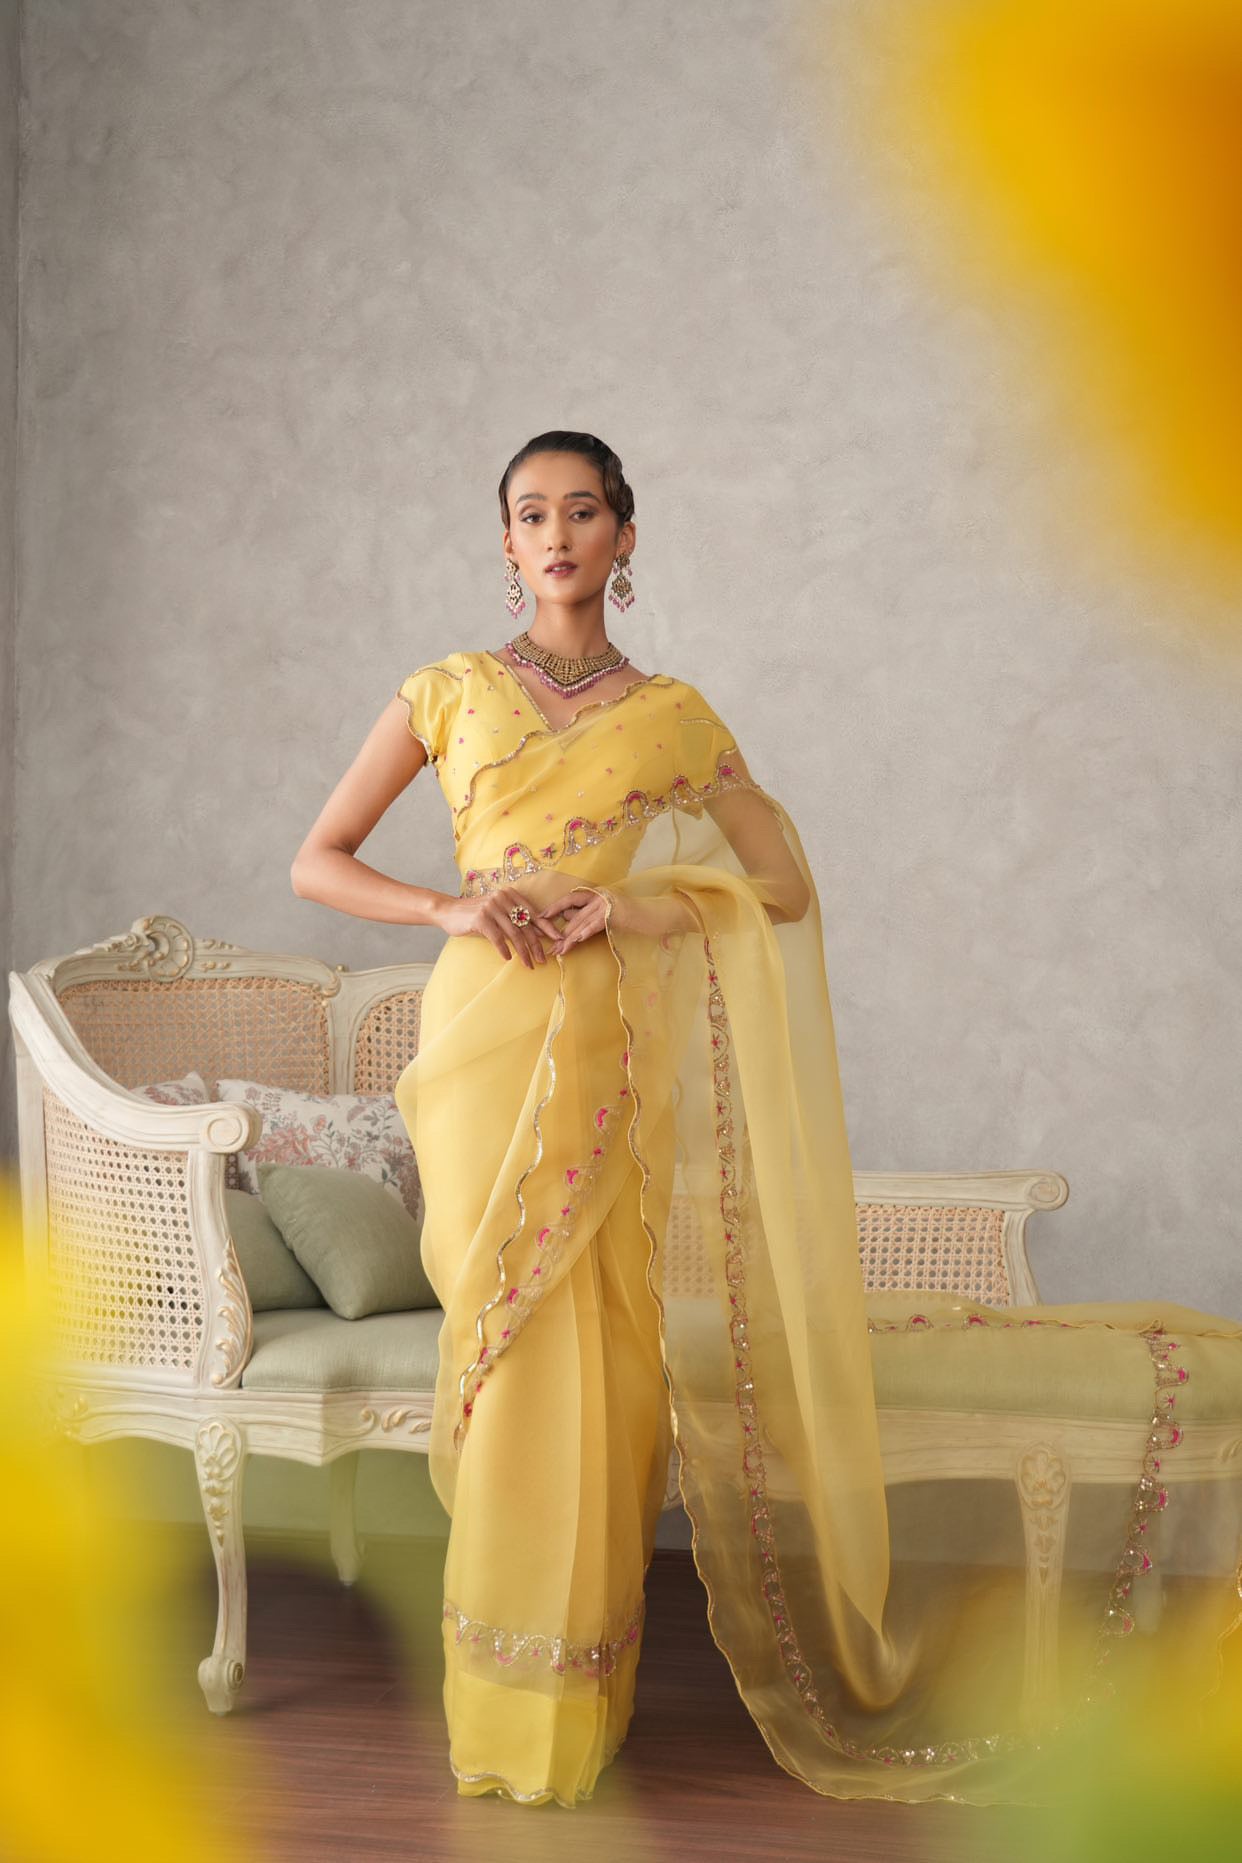 Buttercup yellow organza saree with scalloped edging and embroidered border - Sohni